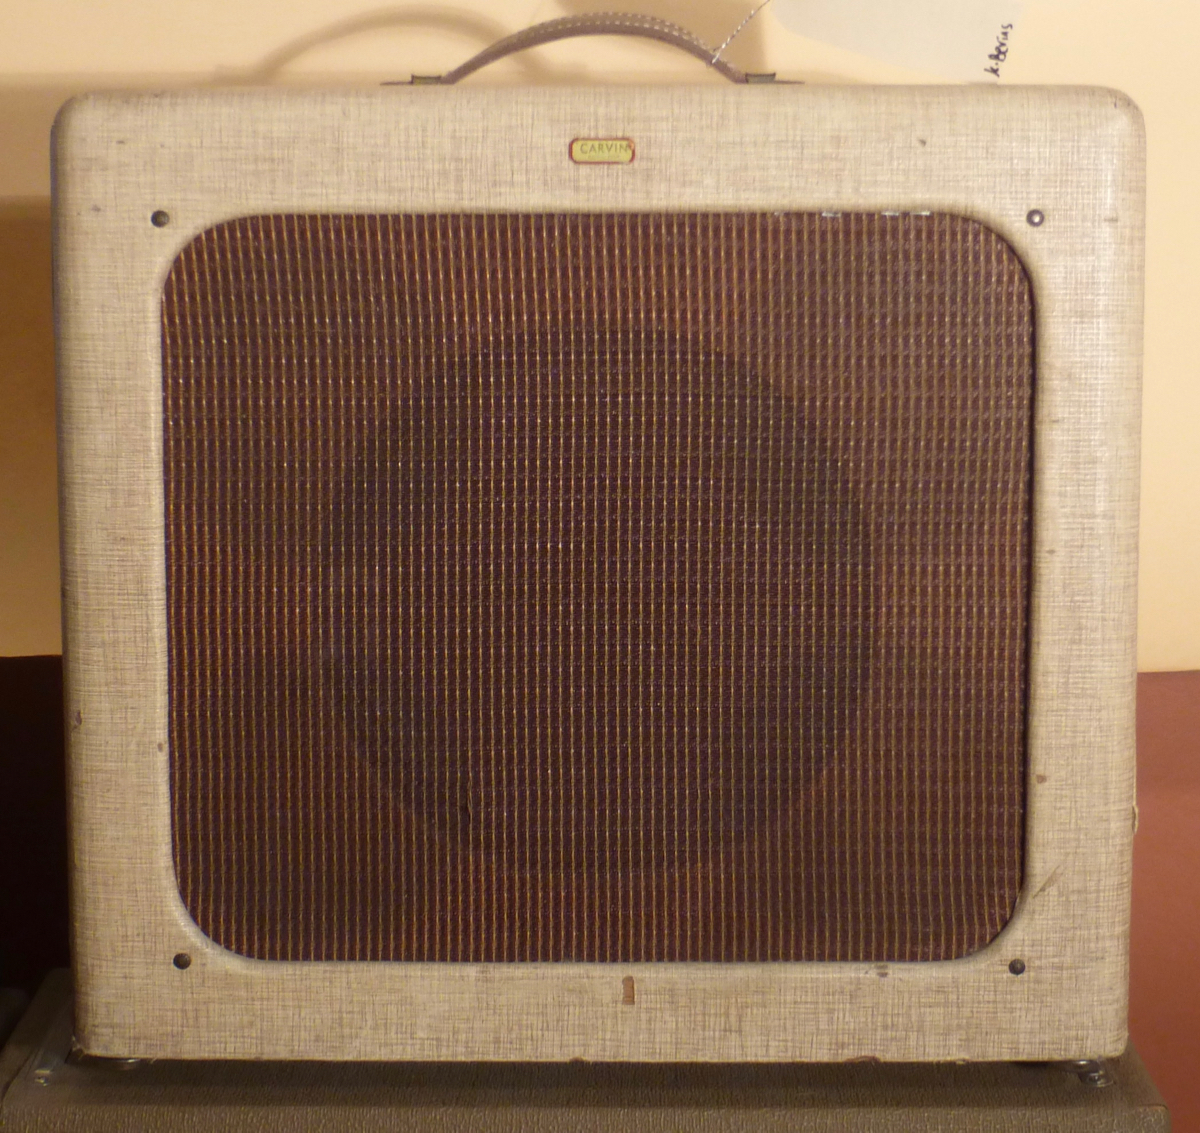 1956/57 Carvin #666 Amp Product